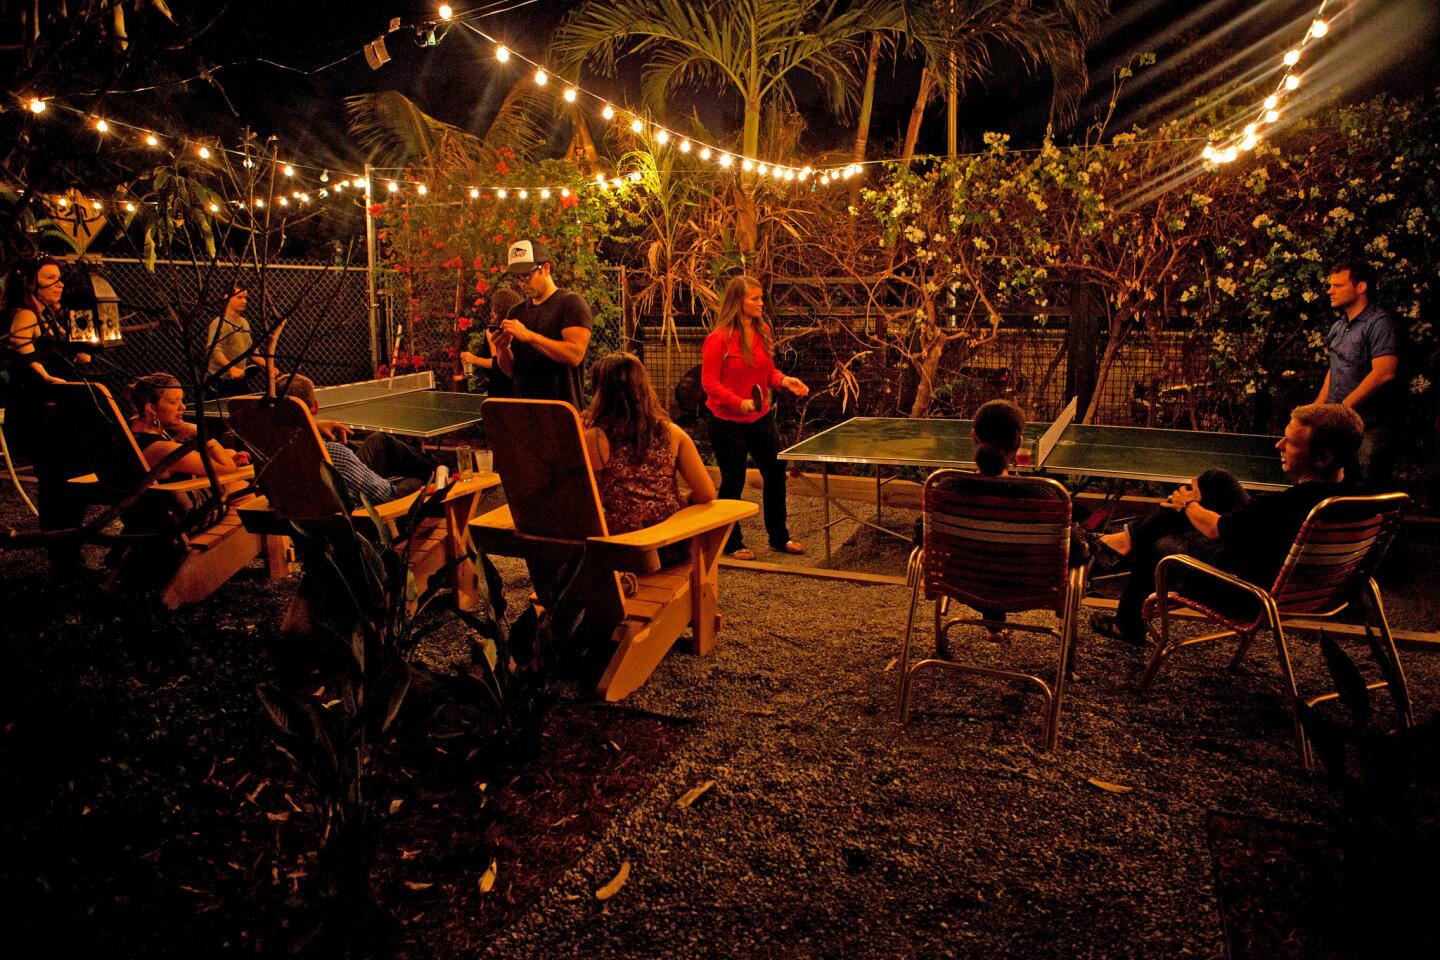 Patrons watch a pingpong game at the Broken Shaker Club, which is inside the Freehand Miami Hostel.